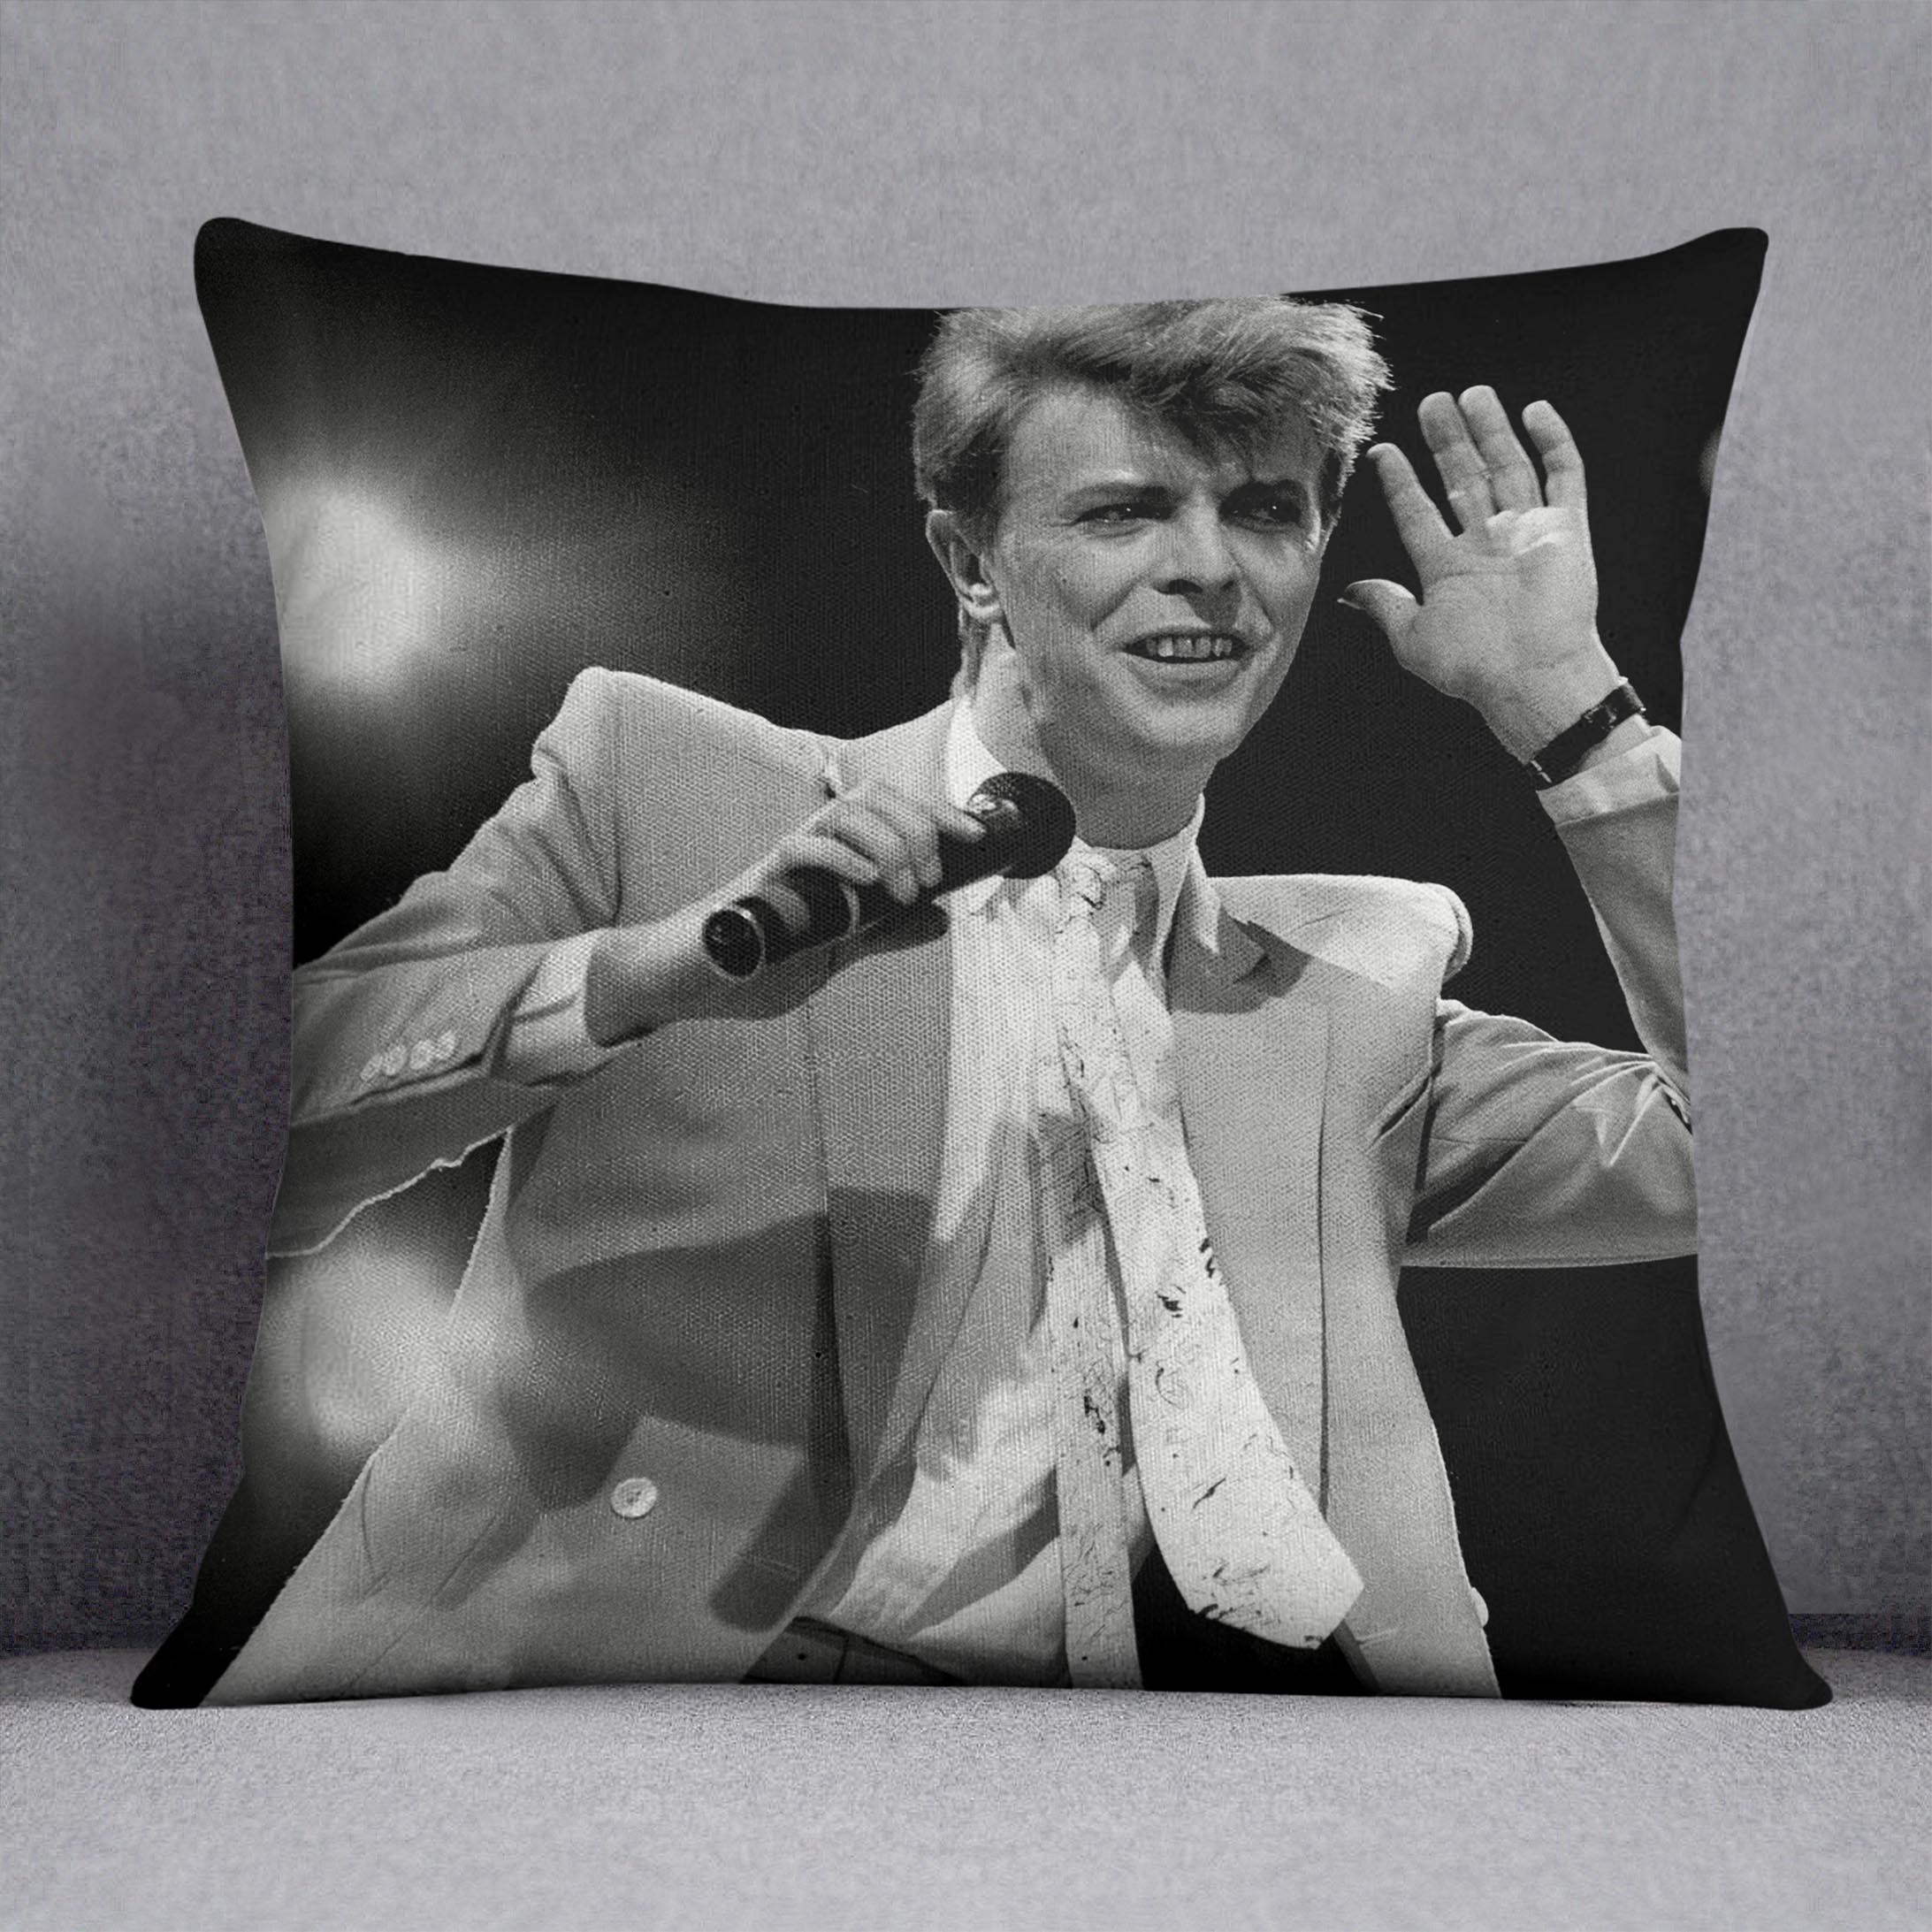 David Bowie in concert Cushion